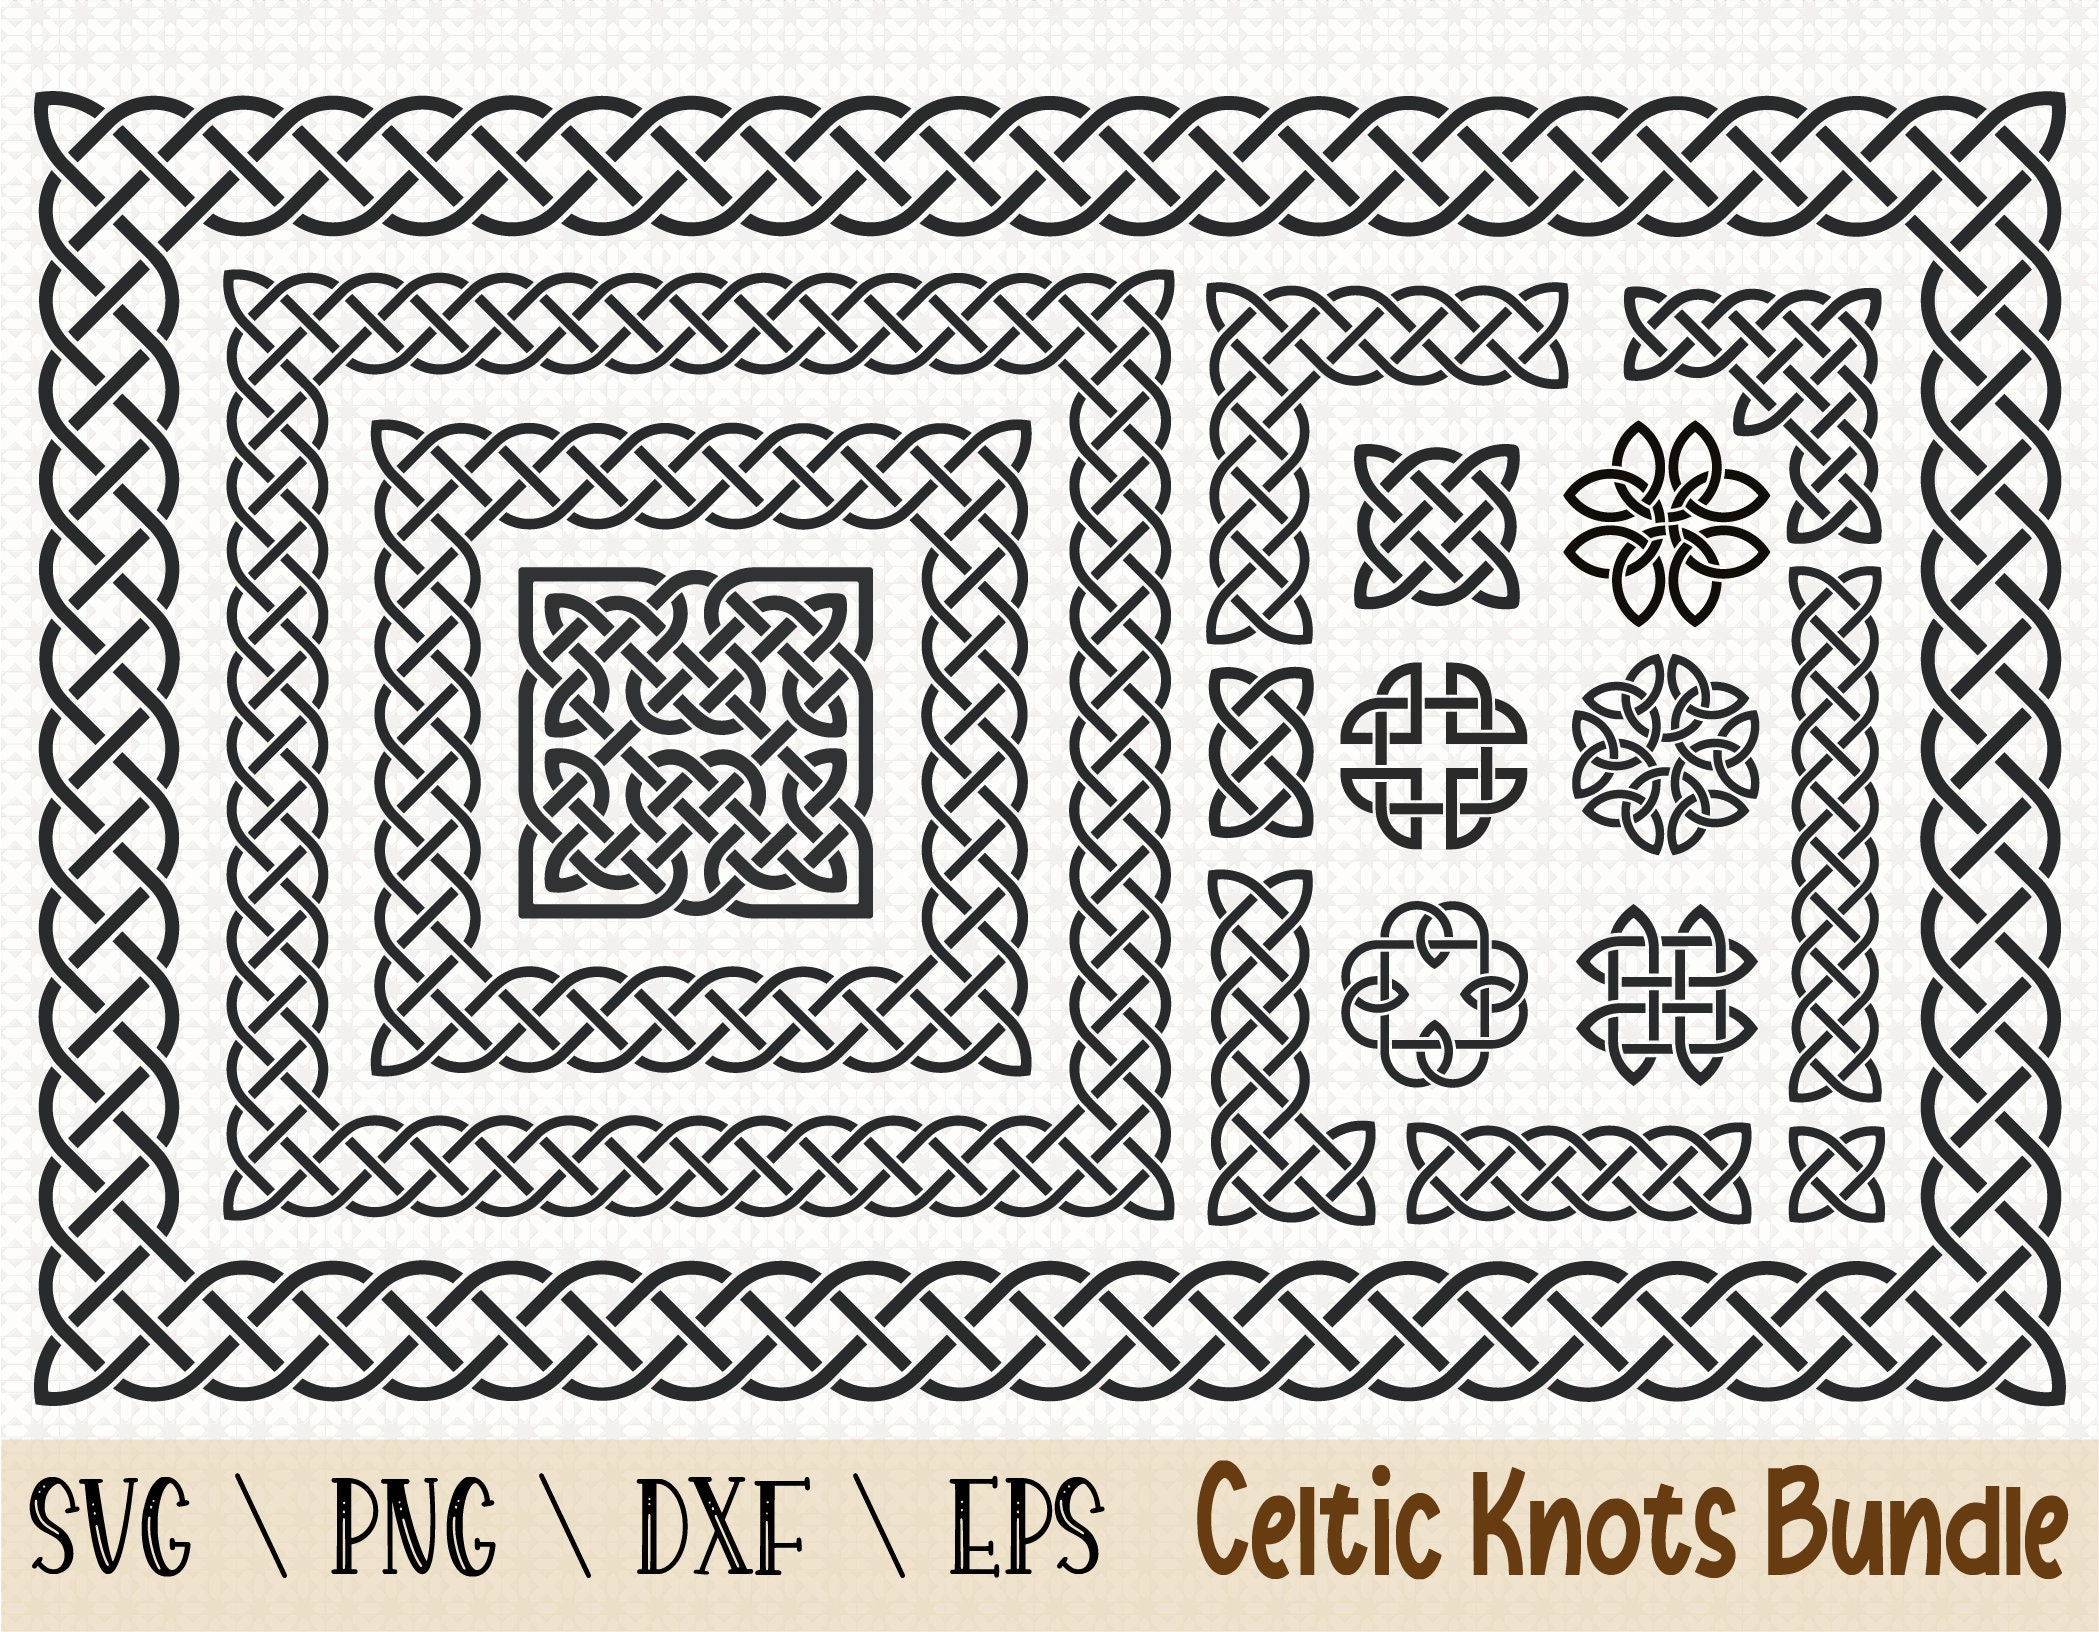 Use on Paper Projects Scrapbook Journal Walls Floors Fabric Furniture Glass Wood etc. - Reusable Geometric Knotwork Sacred Symbol Stencil Template 4.5 x 4 inch M Celtic Trinity Knot Stencil 